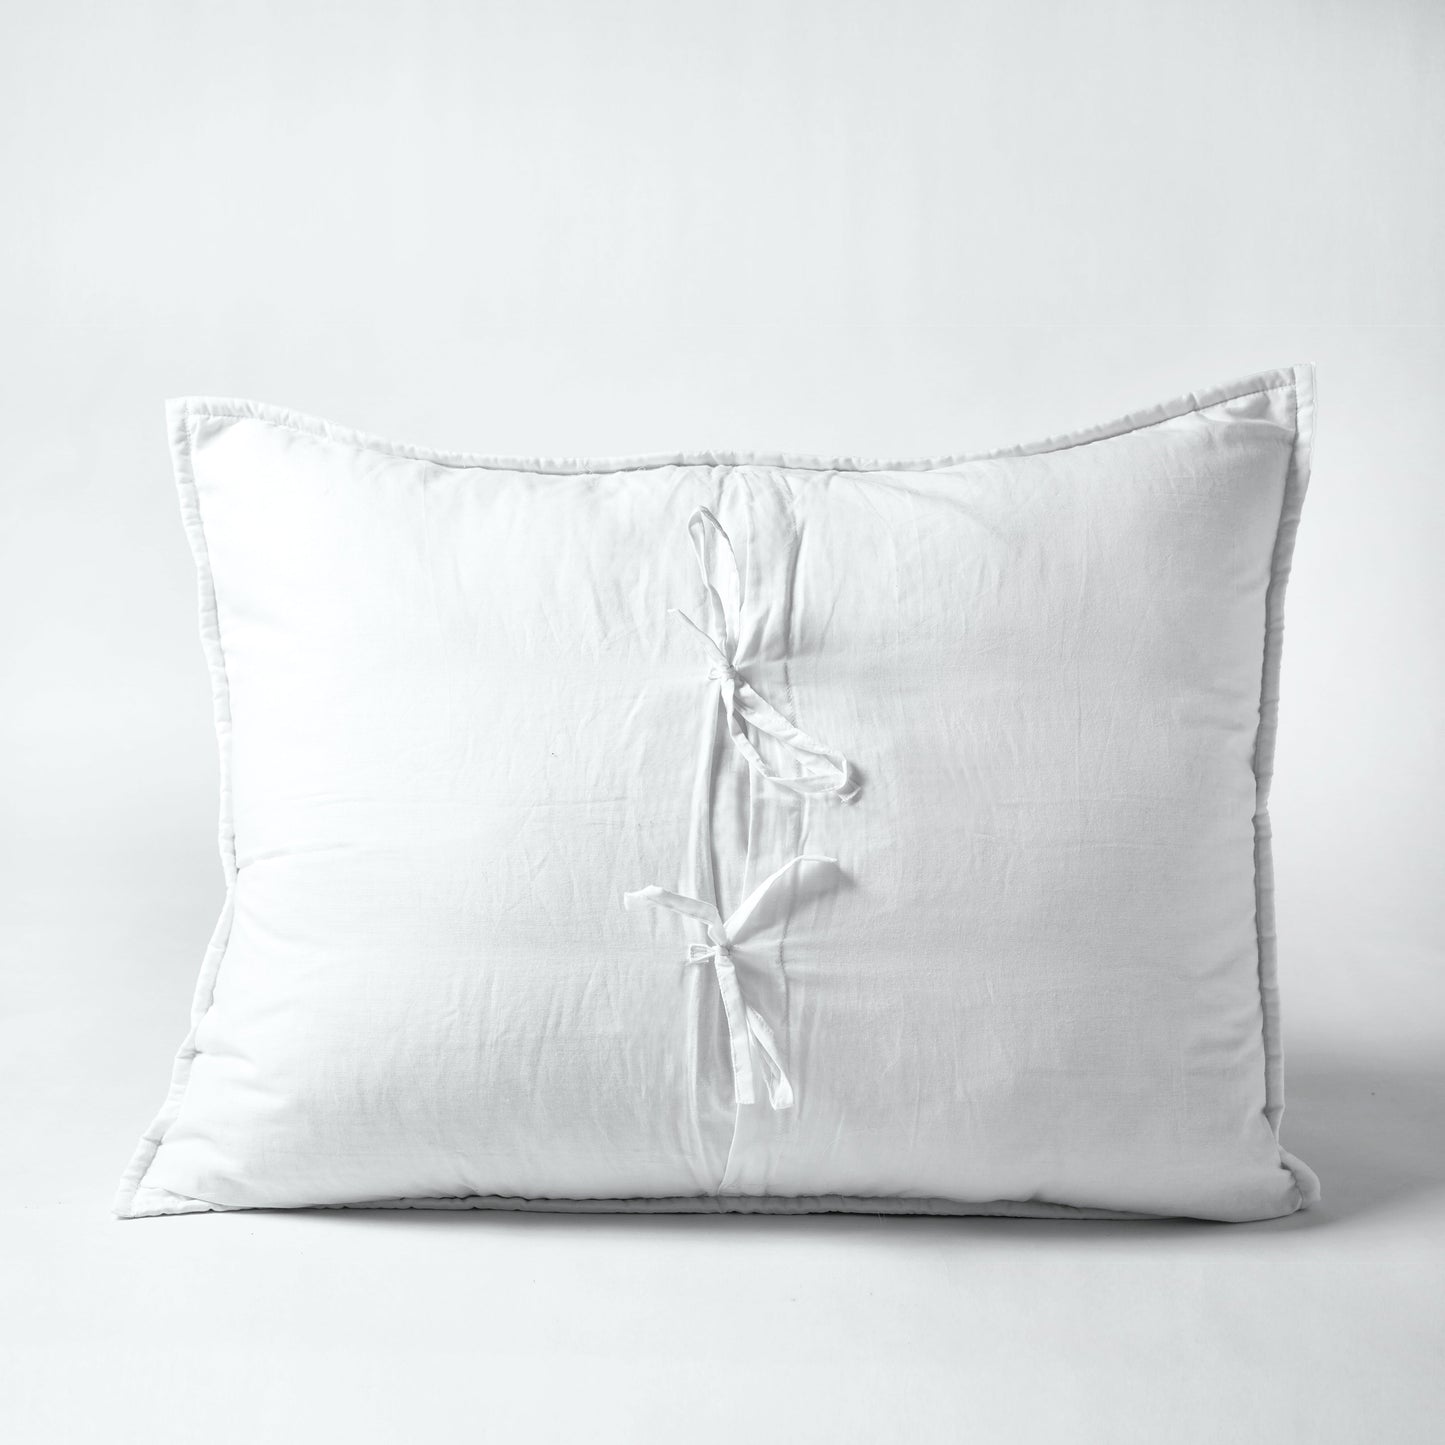 SHWET - White Hexagon Quilted pillow case, 100% cotton, Sizes available